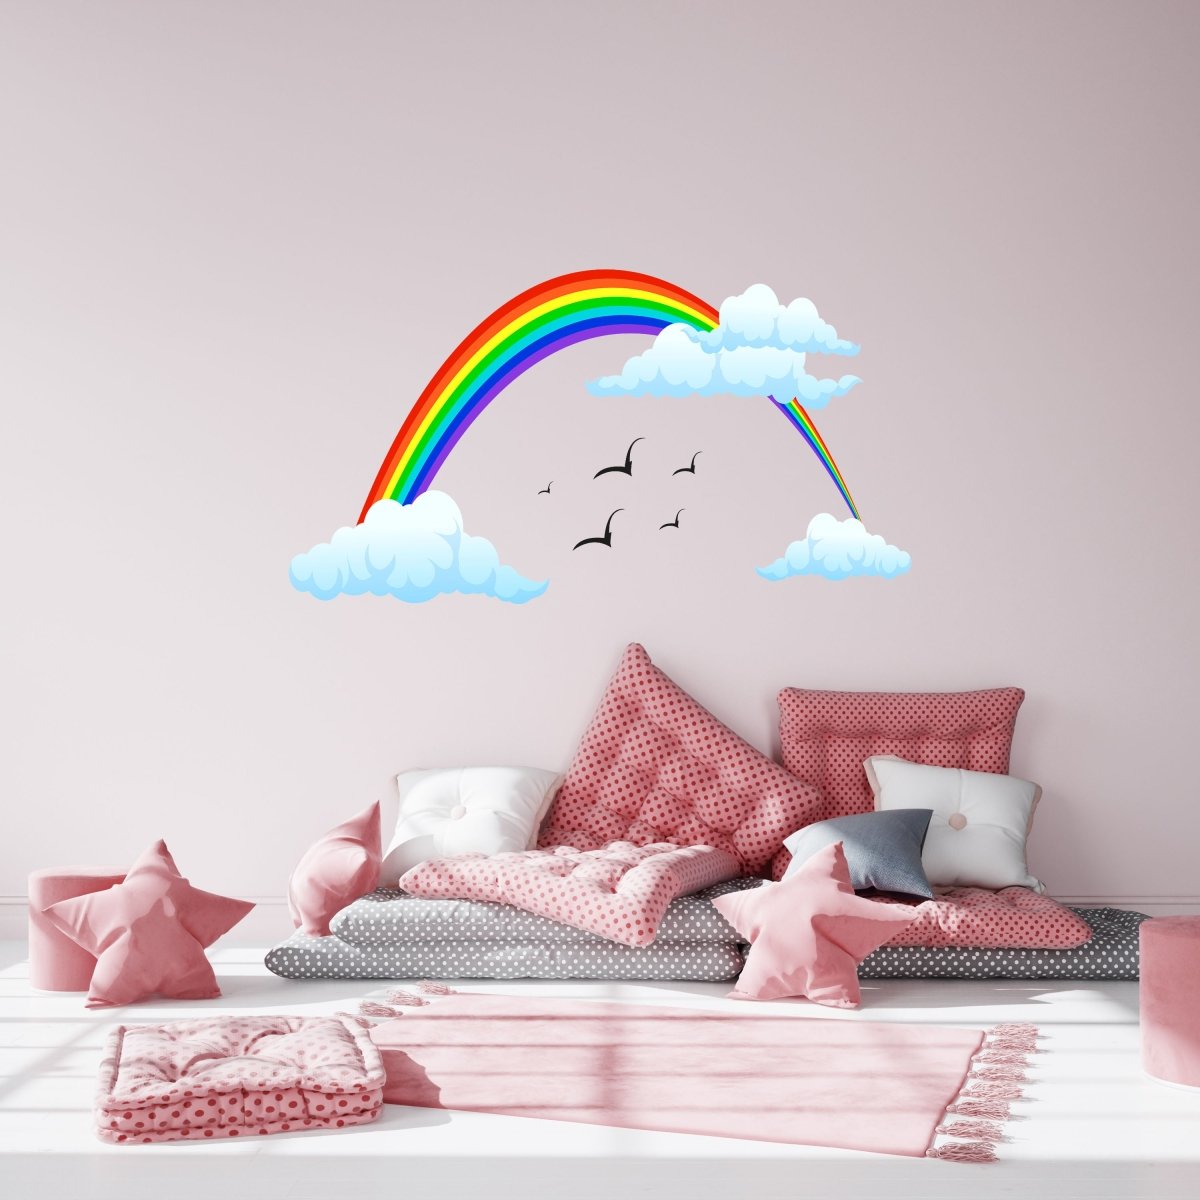 Discover wall stickers WS00000059 sky rainbow, colorful clouds, birds